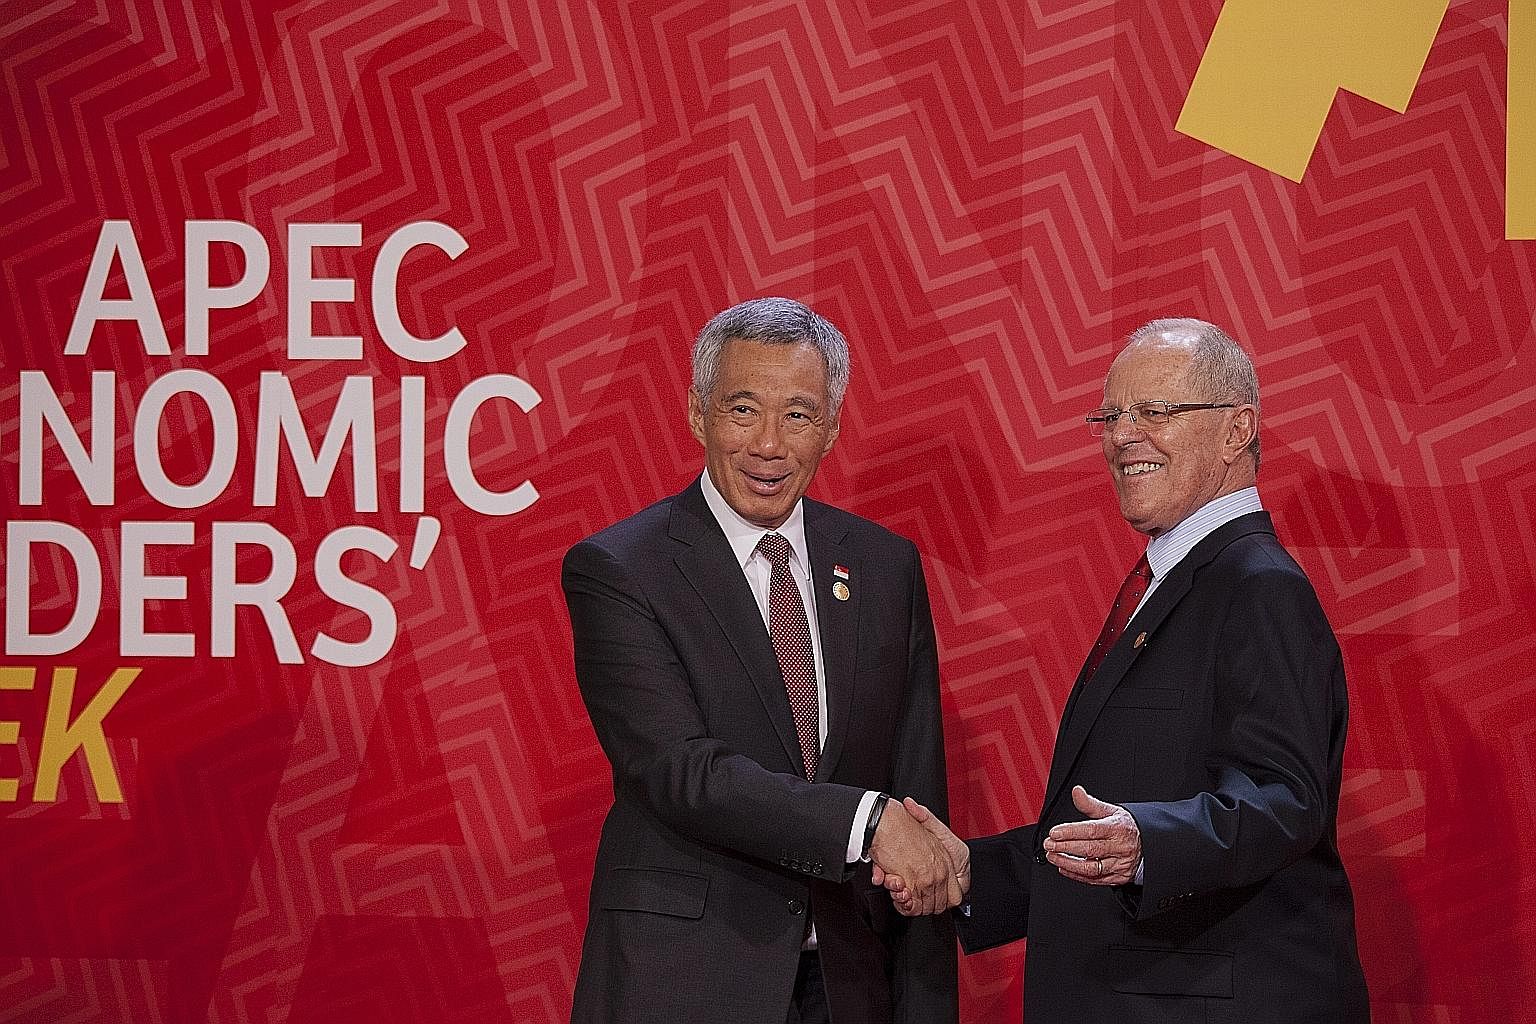 PM Lee Hsien Loong with Peru's President Pedro Pablo Kuczynski at the Apec Leaders' Retreat on Sunday, the last day of the Asia-Pacific Economic Cooperation Summit in Lima.